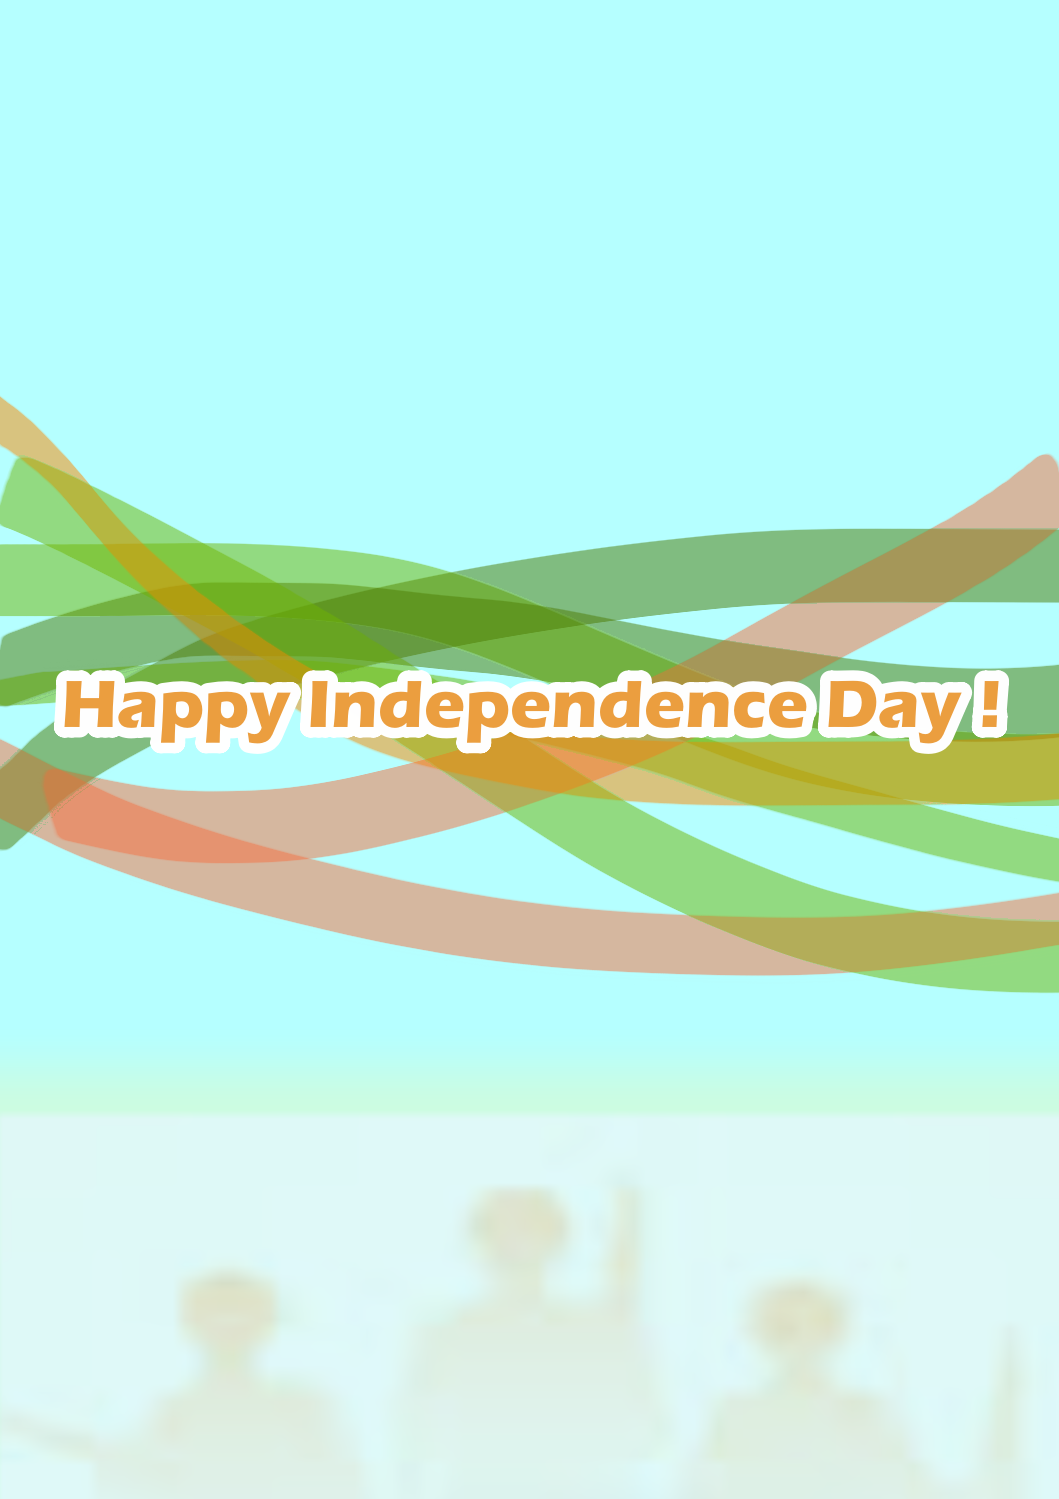 10 Happy 78th Independence Day Wishes in India